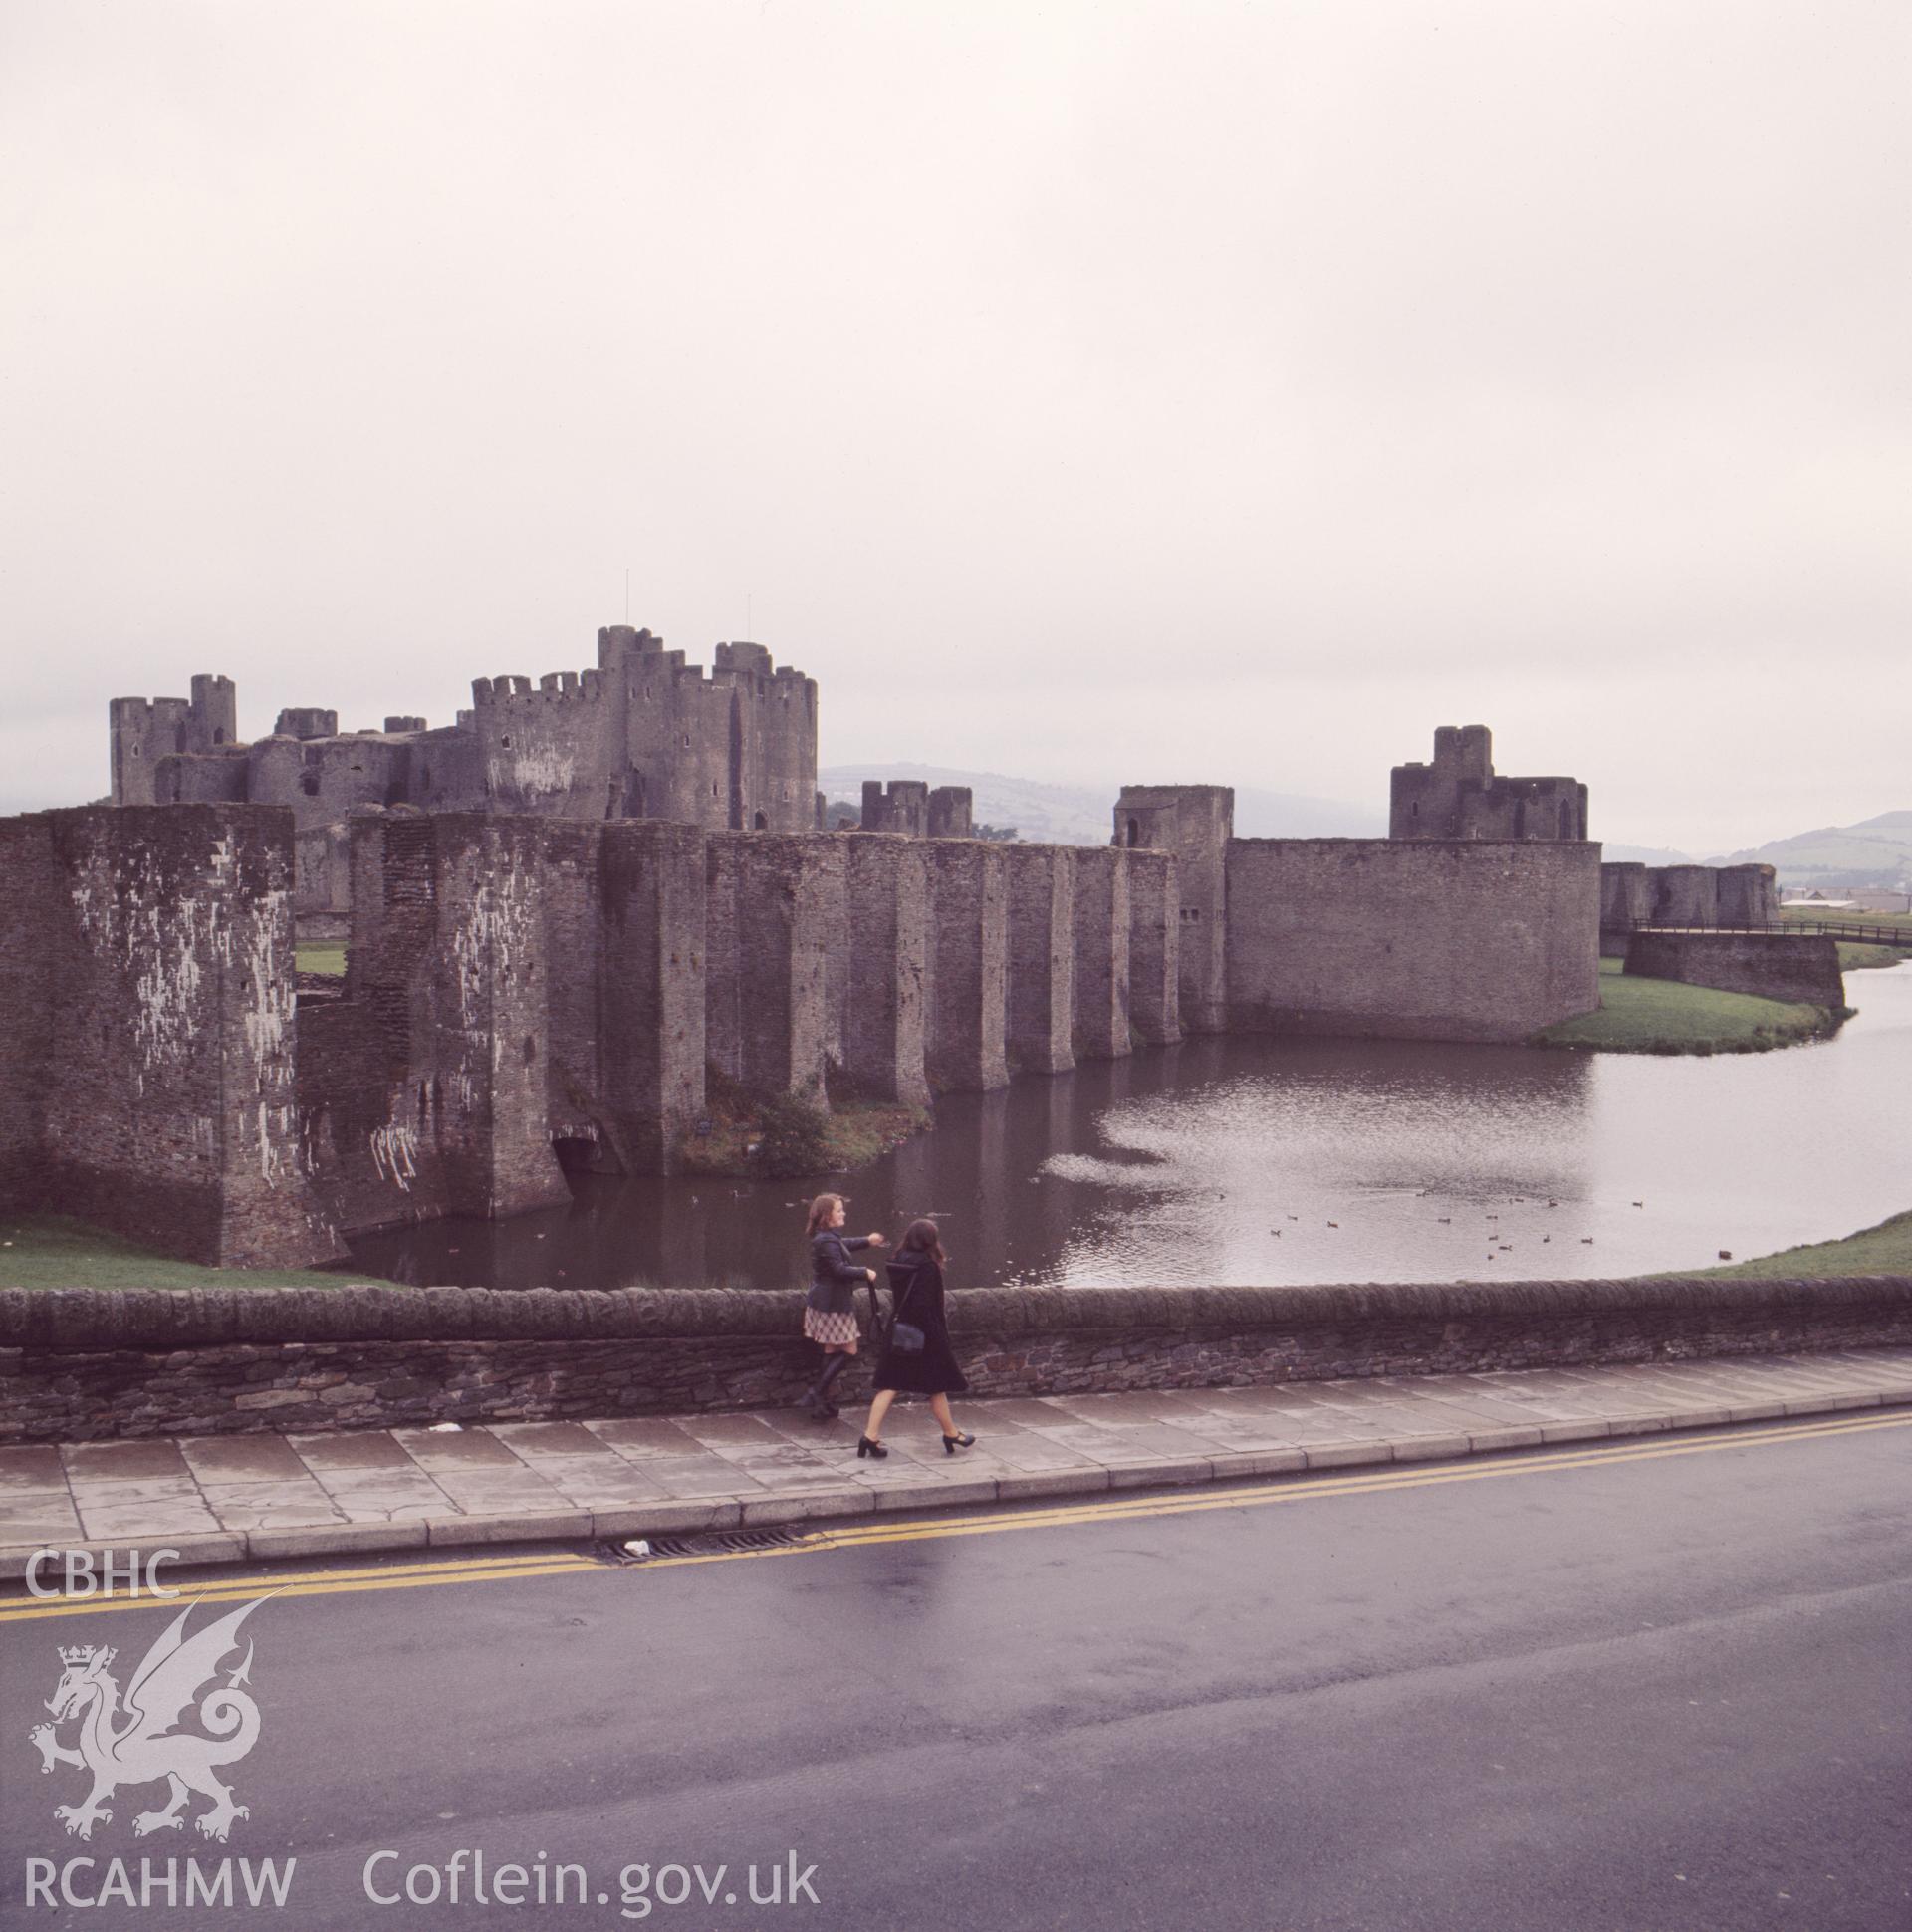 1 colour transparency showing view of Caerphilly Castle, undated; collated by the former Central Office of Information.